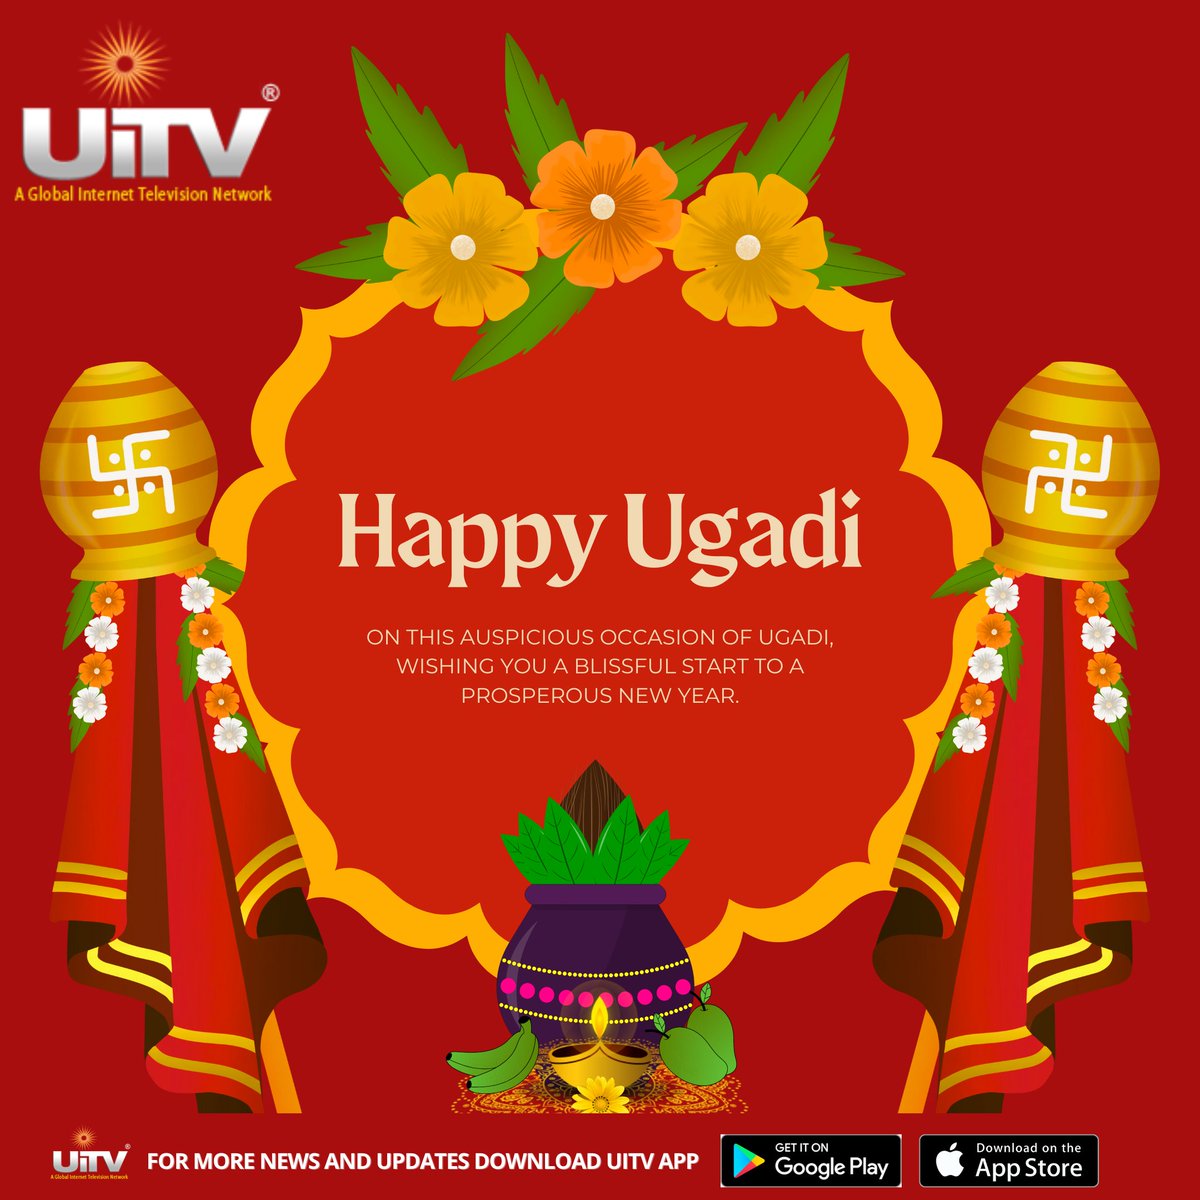 '🎉 Happy Ugadi to all our wonderful followers! 🌼 Let's welcome the new year with joy, prosperity, and endless blessings. 🌟 🙏 🌸 #HappyUgadi #NewYear #Prosperity #Joy #Celebration #Blessings #FestiveSeason' 🎊🍃